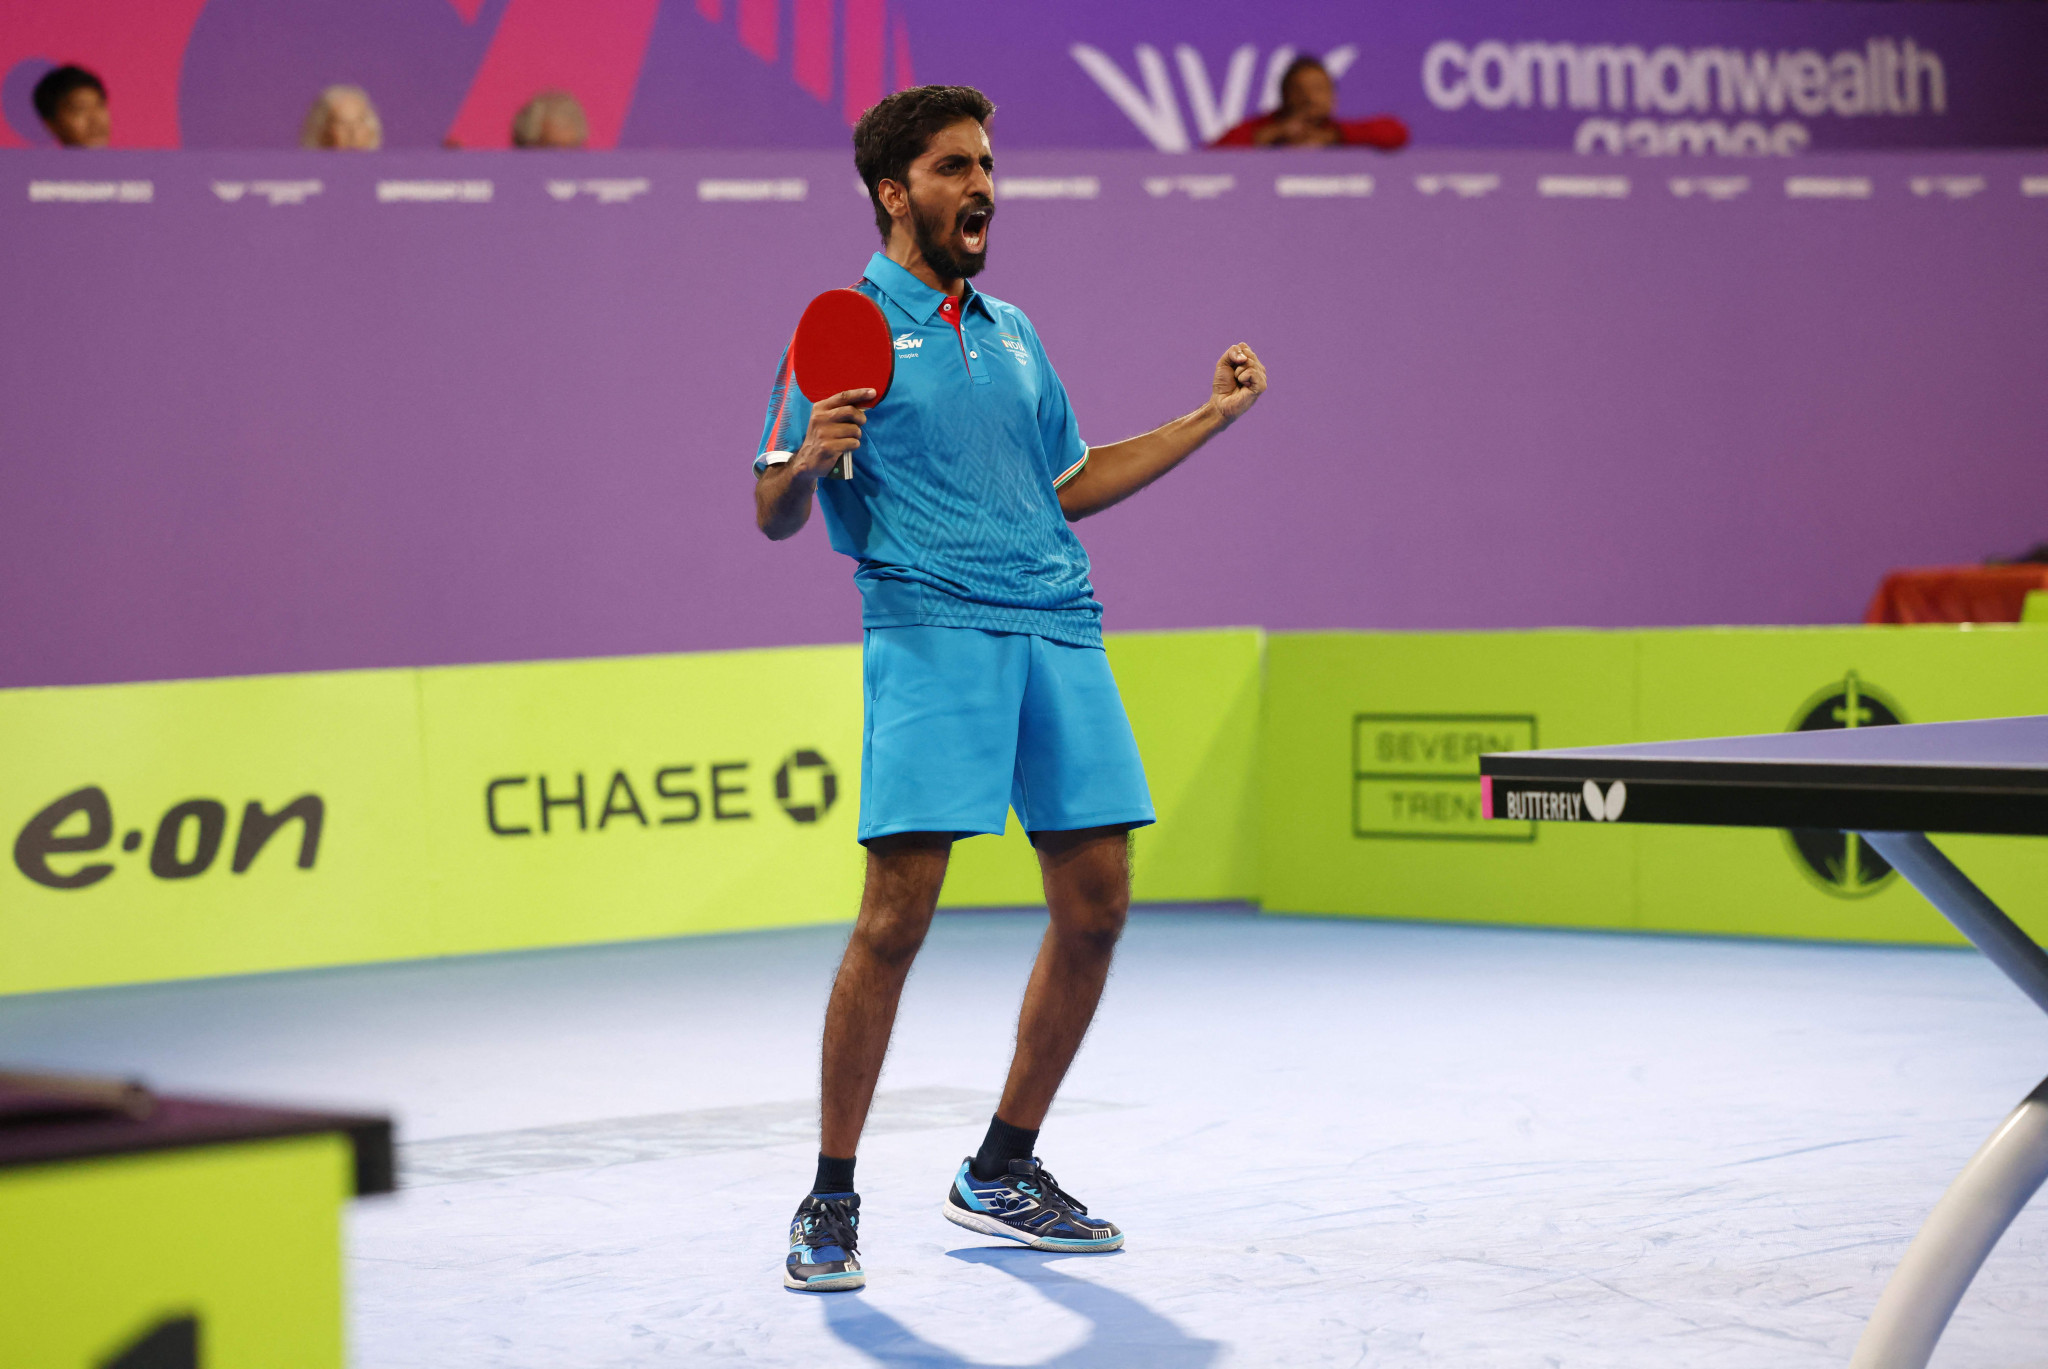 India secured the gold medal in the men's team event in table tennis ©Getty Images